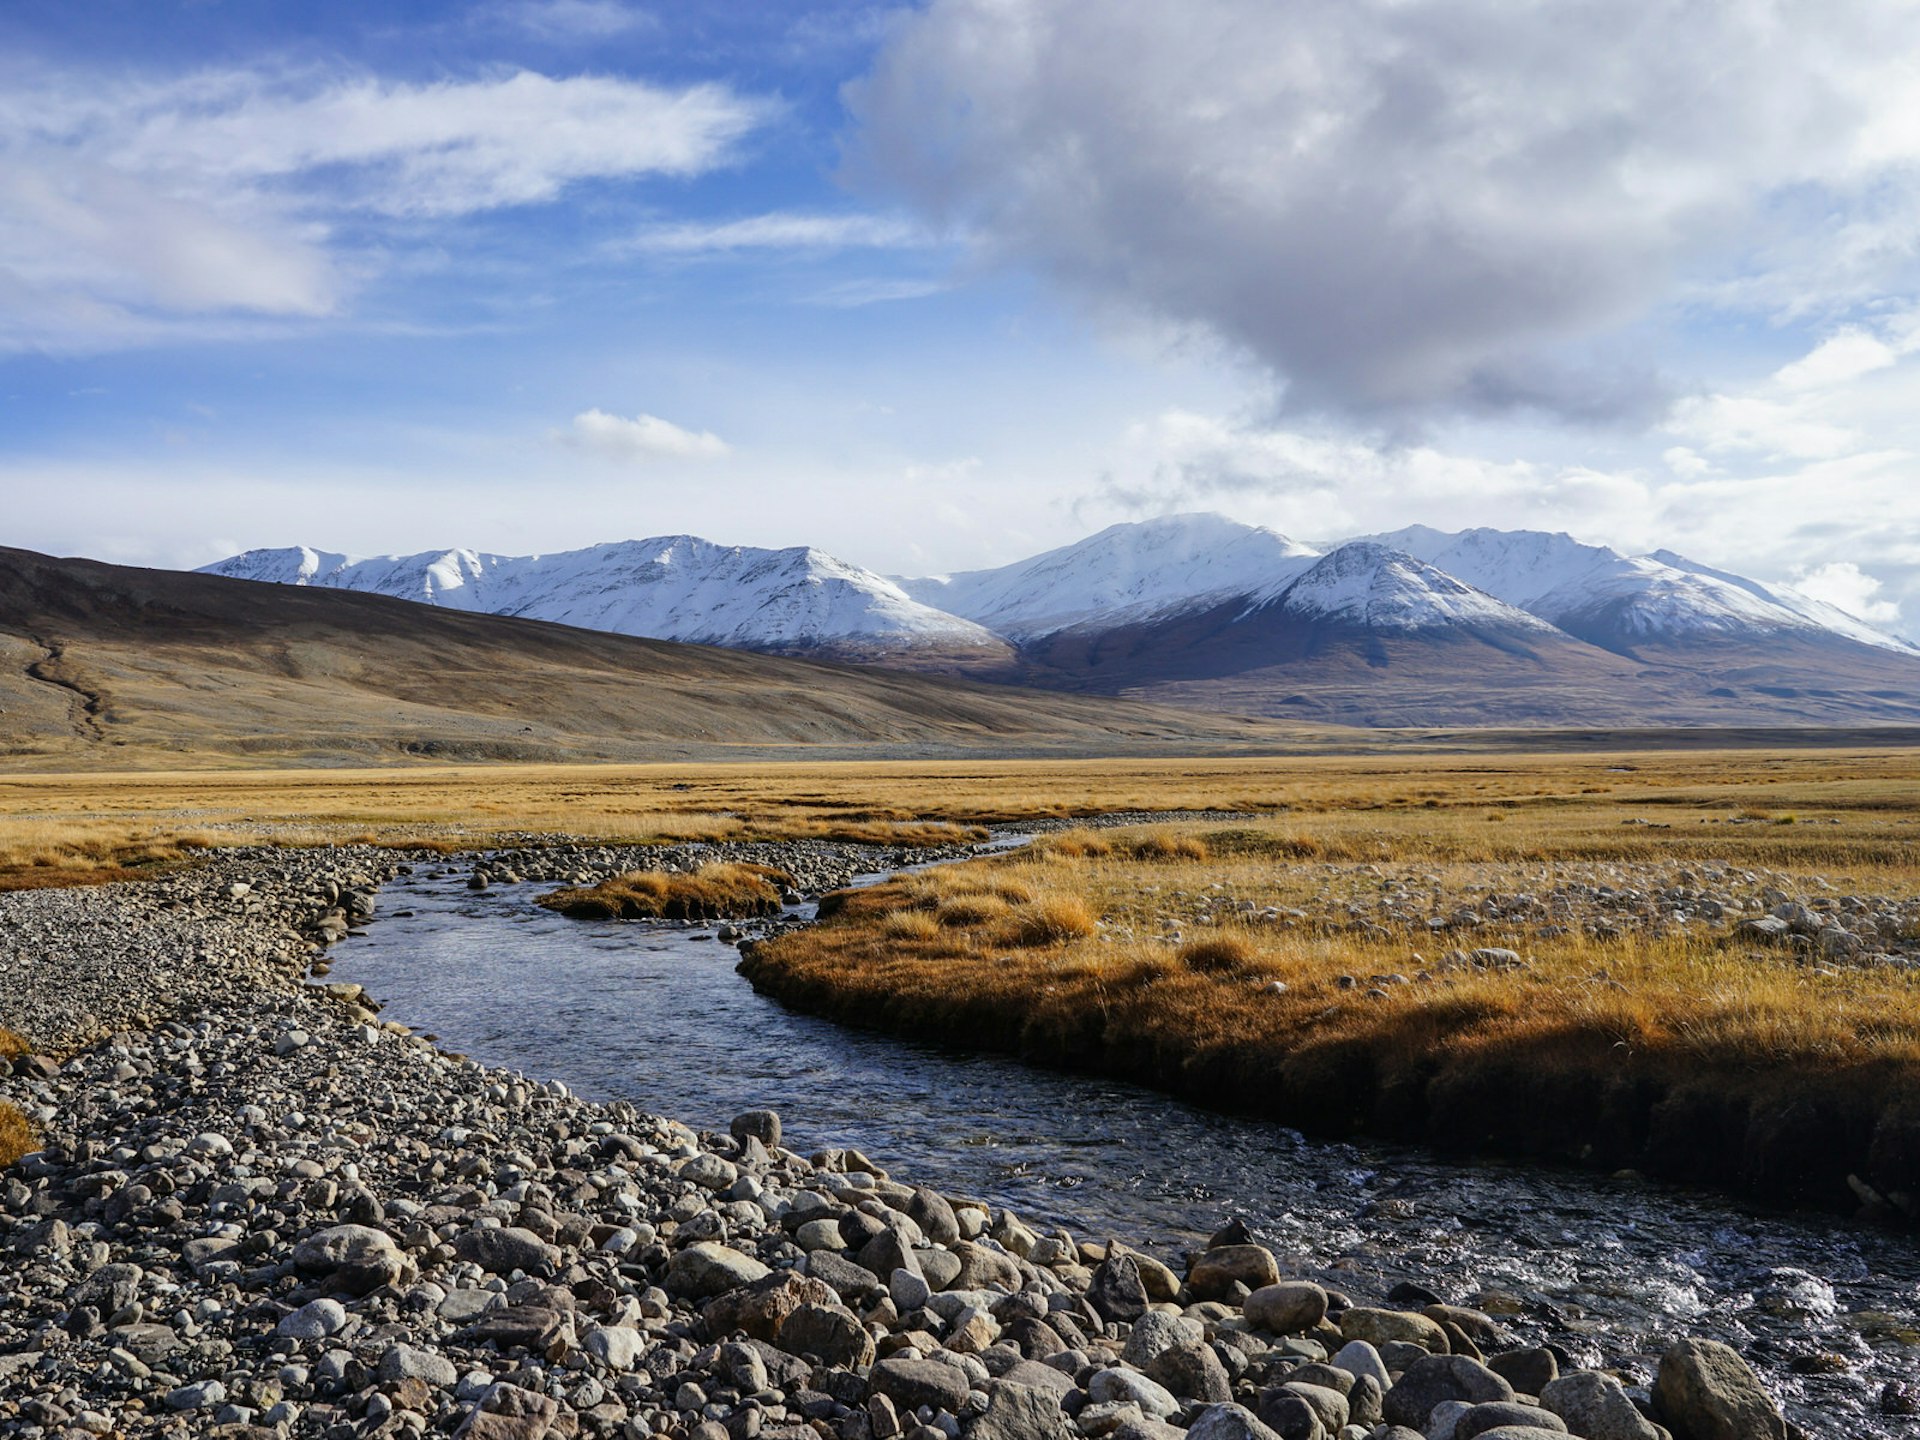 View of a river in the foreground with yellowed grass meadow and snow-capped mountains in background